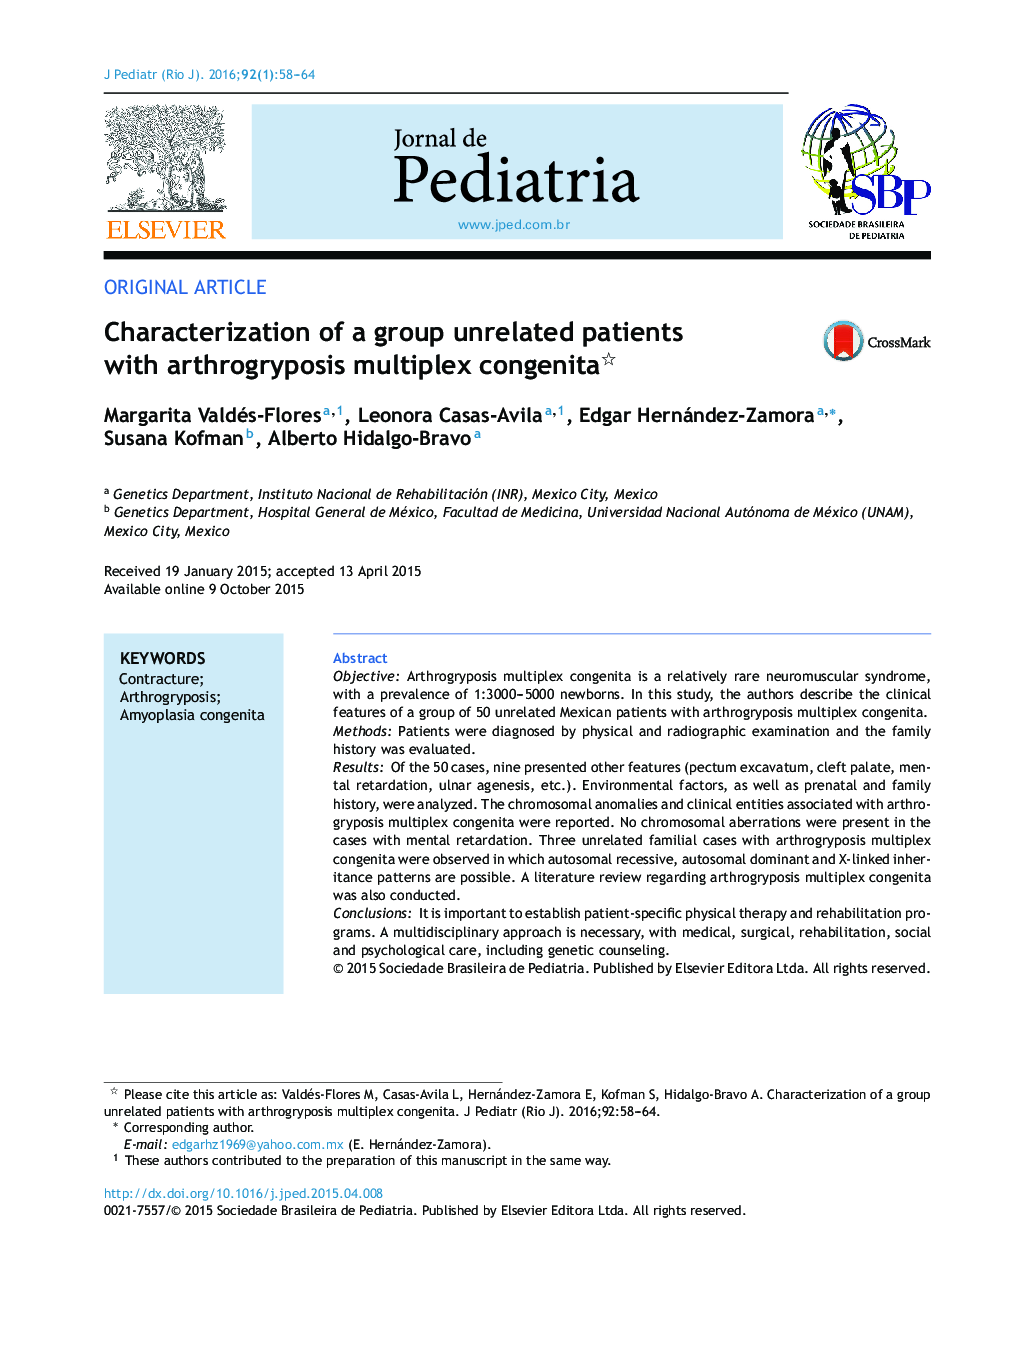 Characterization of a group unrelated patients with arthrogryposis multiplex congenita 